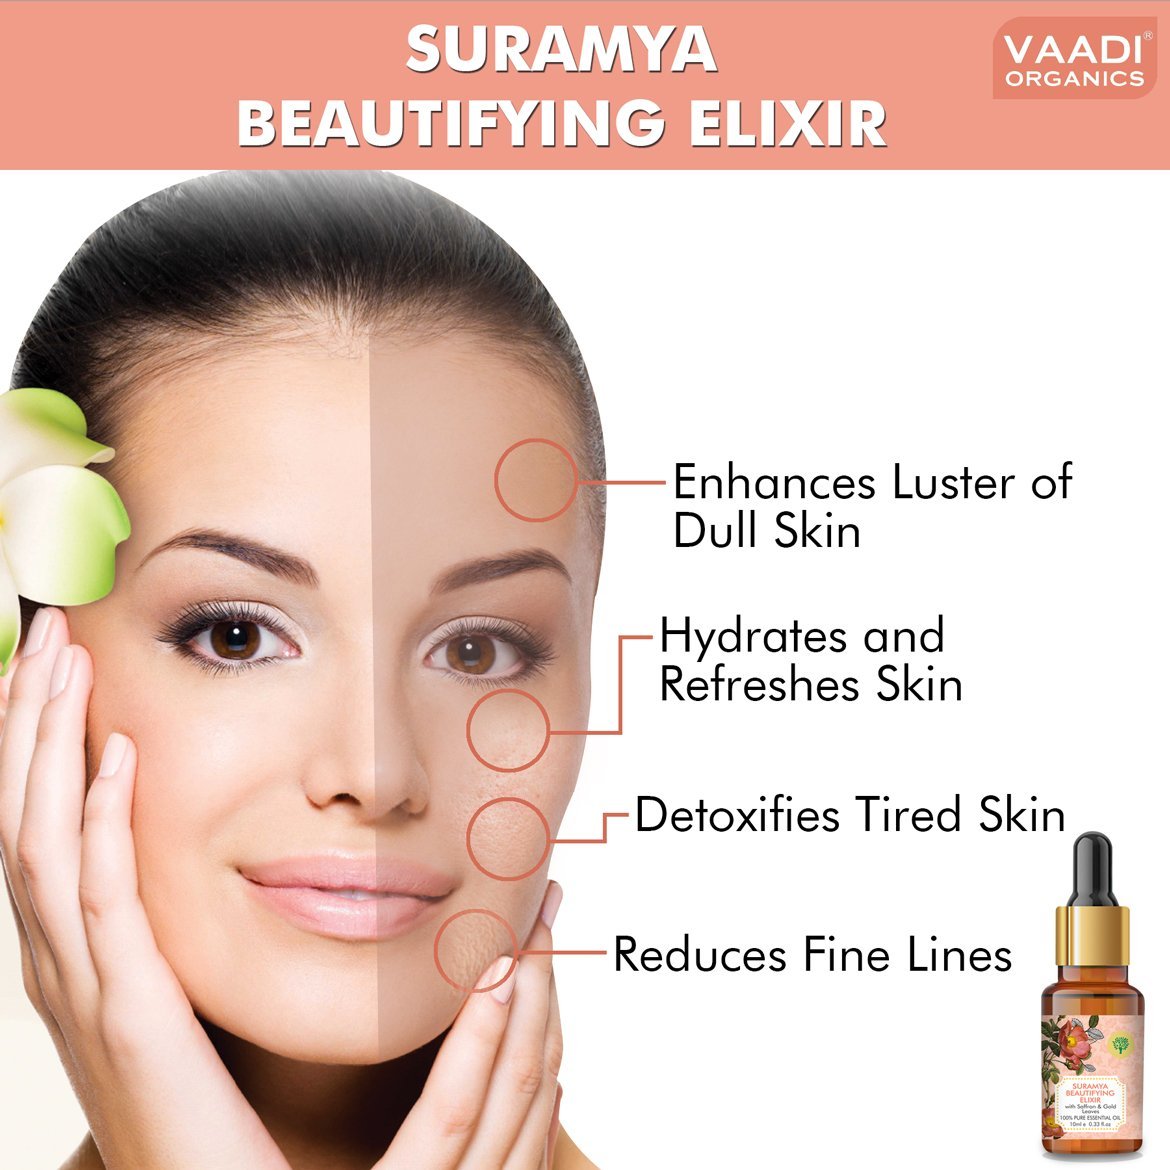 Pack of 2 Organic Suramya Beautifying Elixr (Pure Mix of Saffron, 24k Gold Leaves & Sweet Almond Oil) - Reduces Fine Lines, Improves Skin Complexion & Gives a Natural Glow (2 x 10 ml/ 0.33 oz)